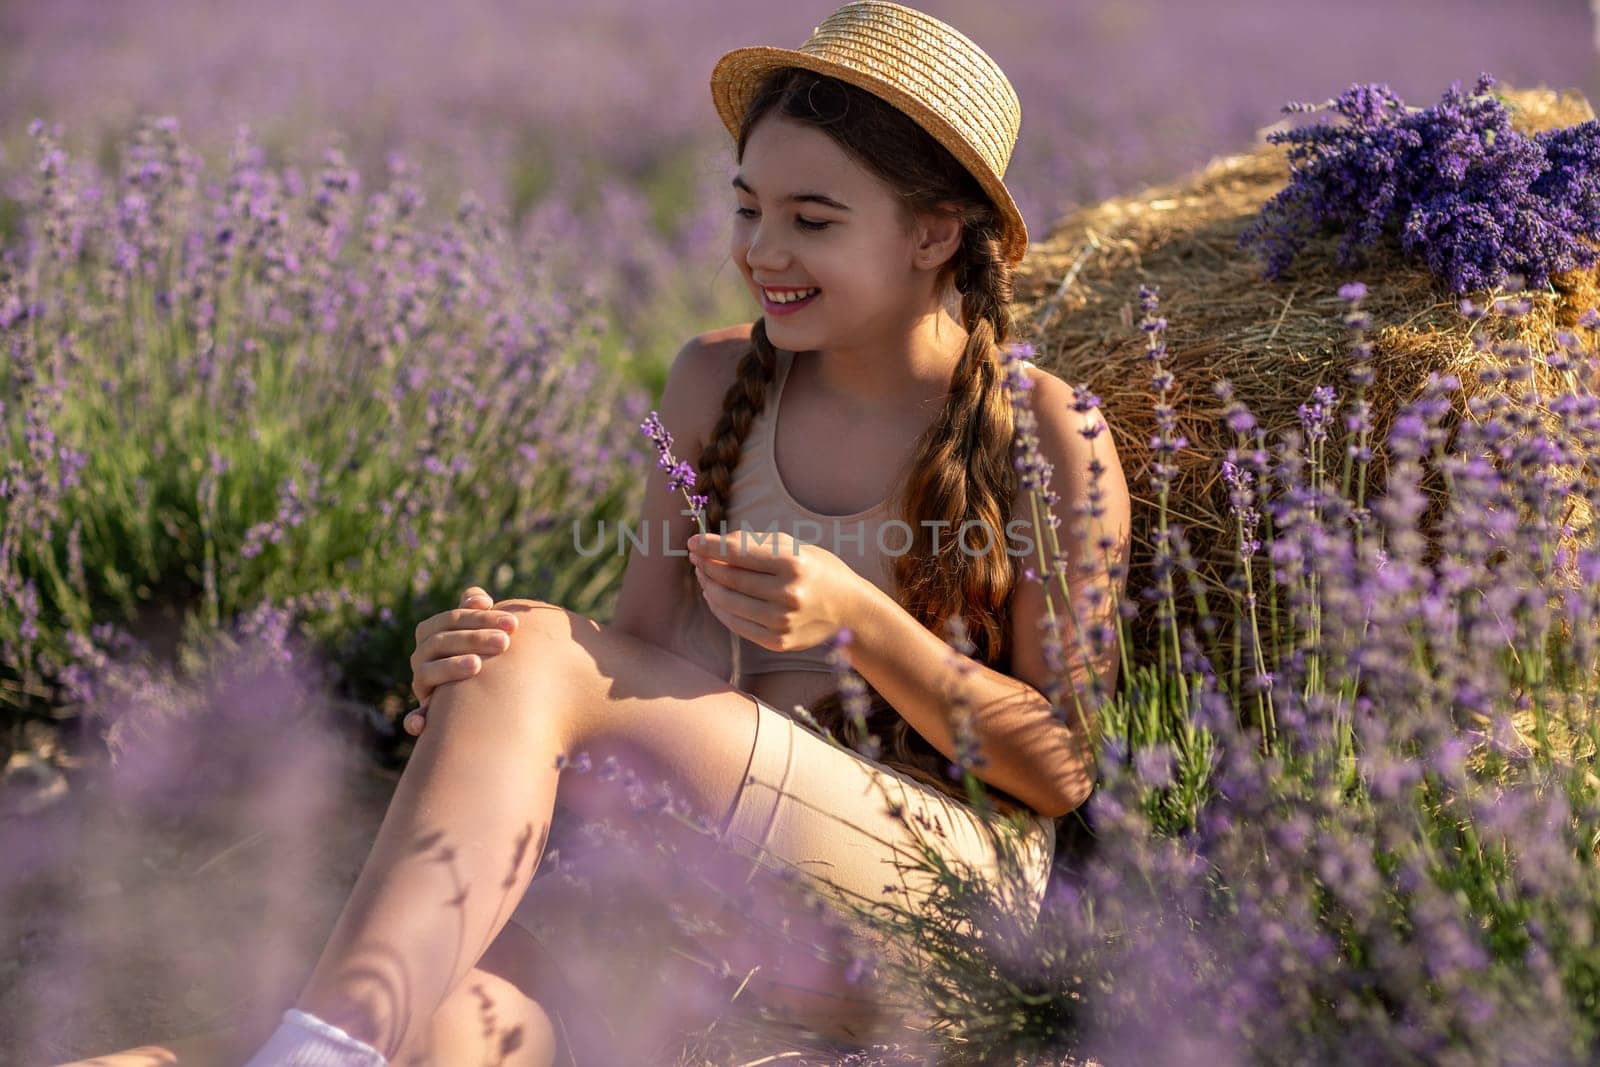 A young girl is sitting in a field of purple flowers, holding a purple flower in her hand. She is smiling and she is enjoying the moment. Concept of happiness and contentment